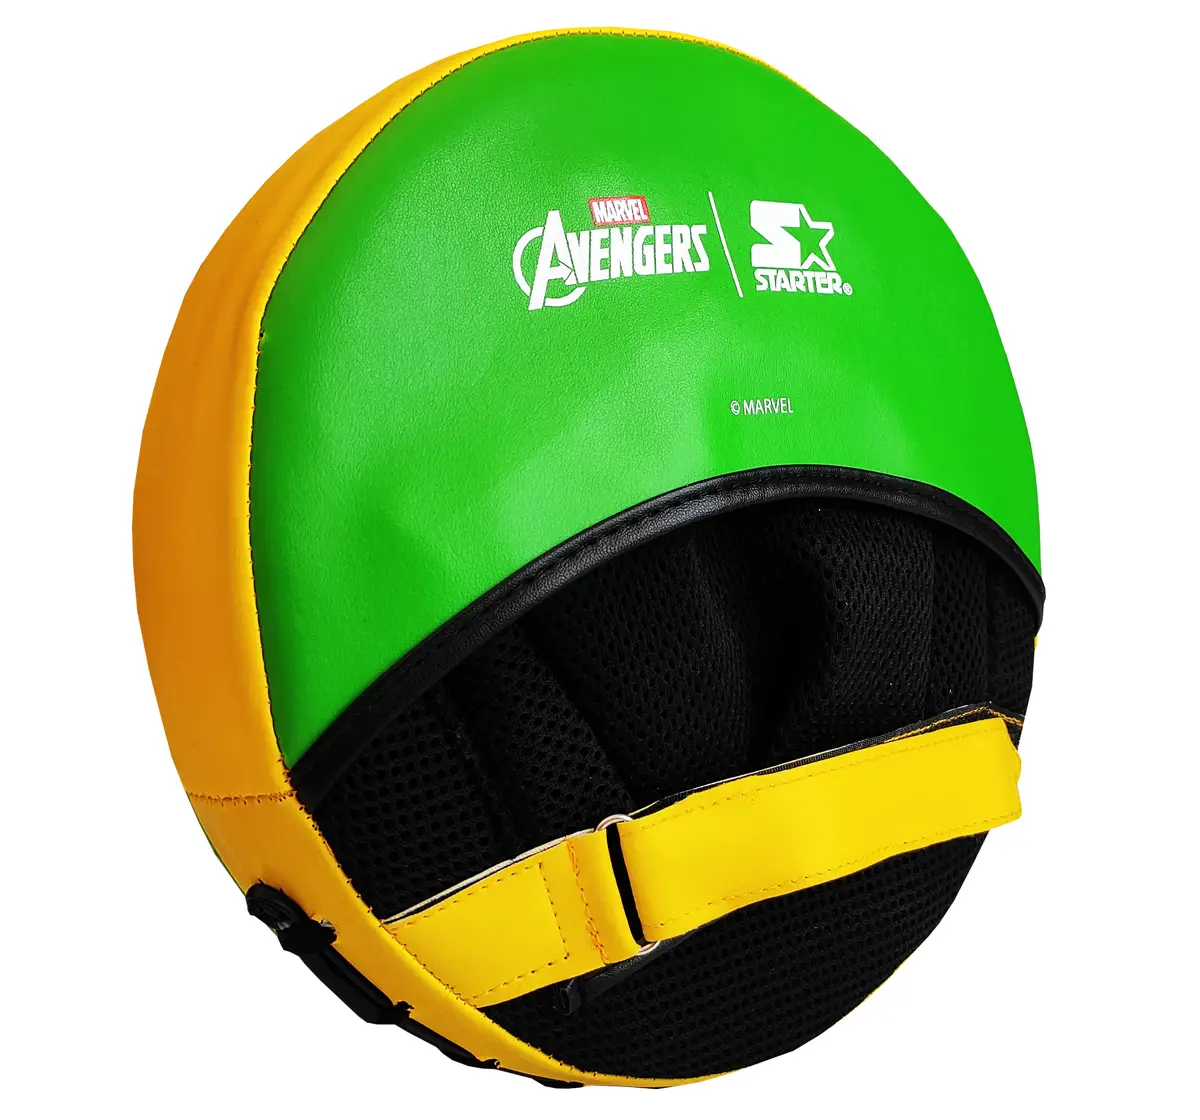 Starter Hulk Boxing Glove And Focus Pad Multicolour, 3Y+